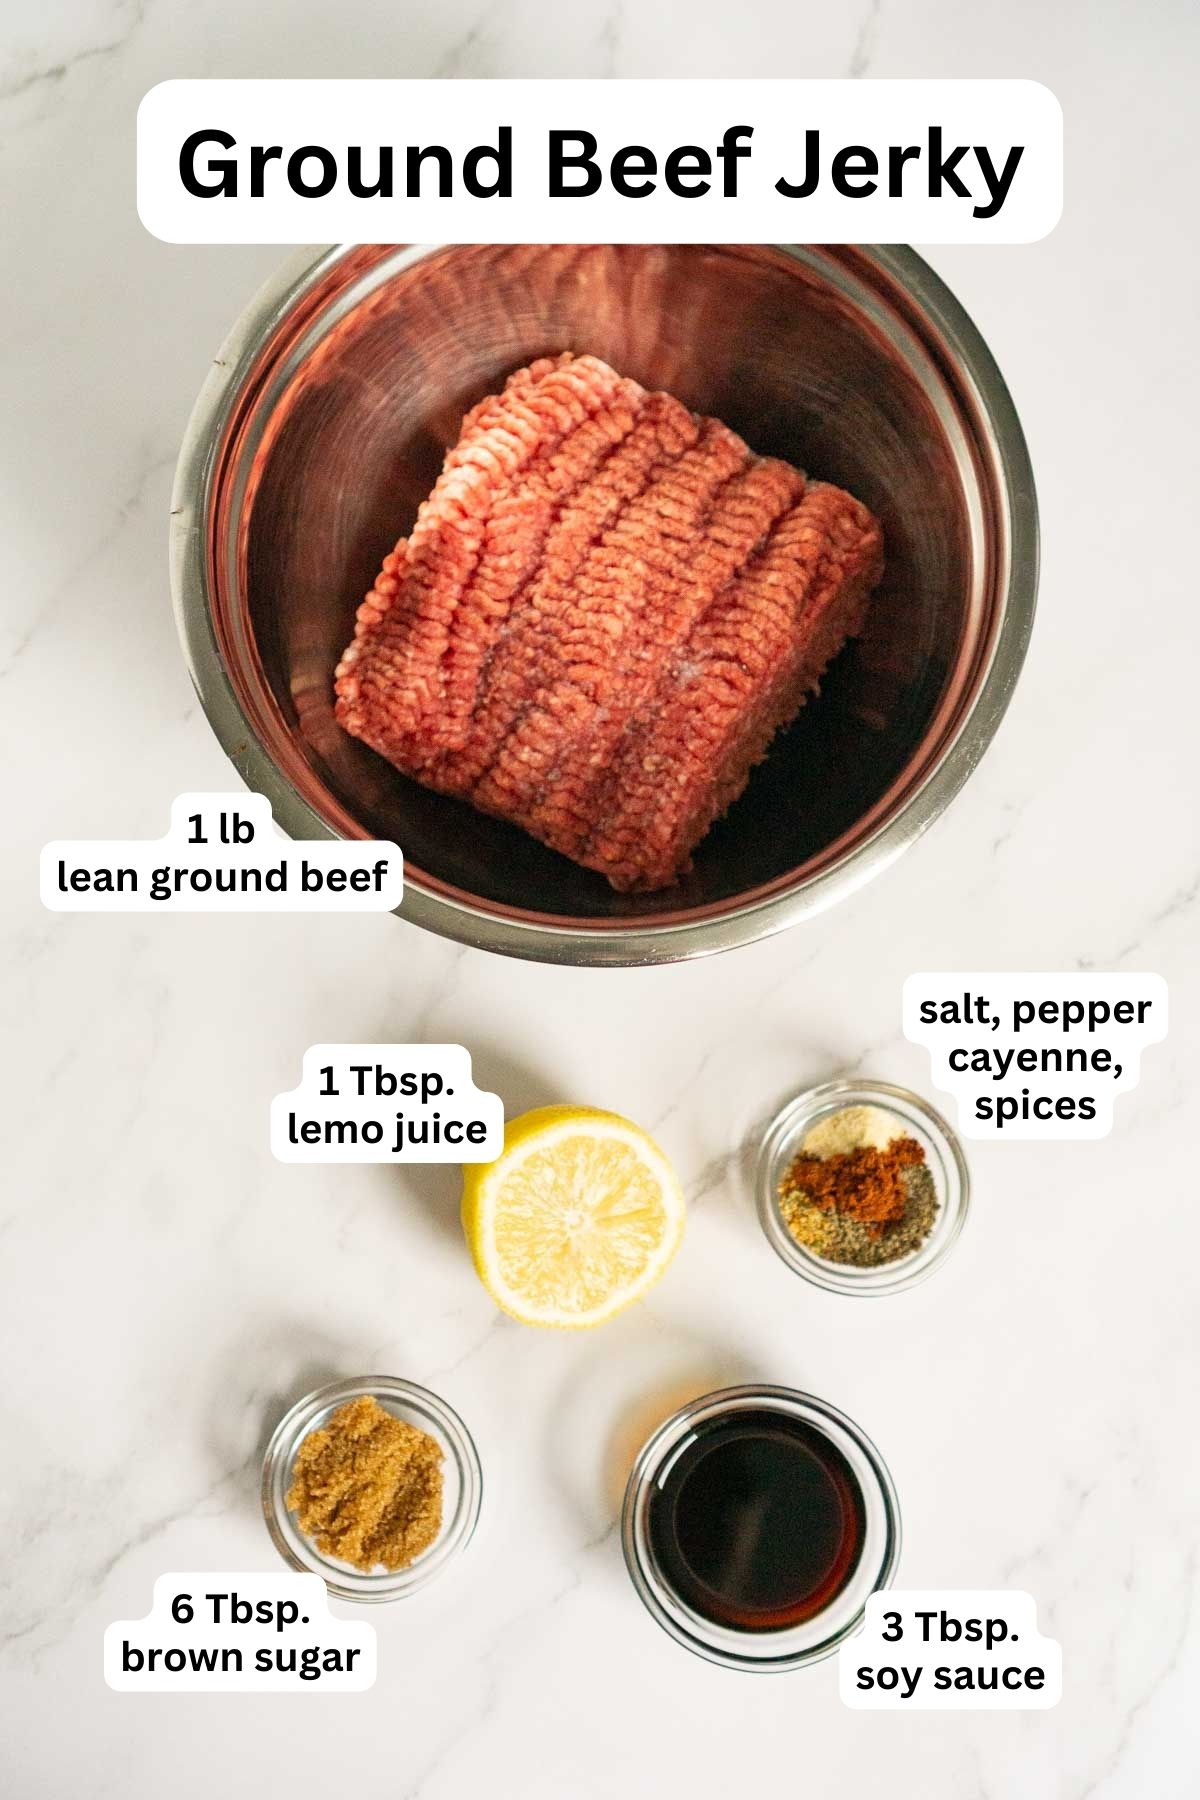 Ingredients to make jerky with ground beef